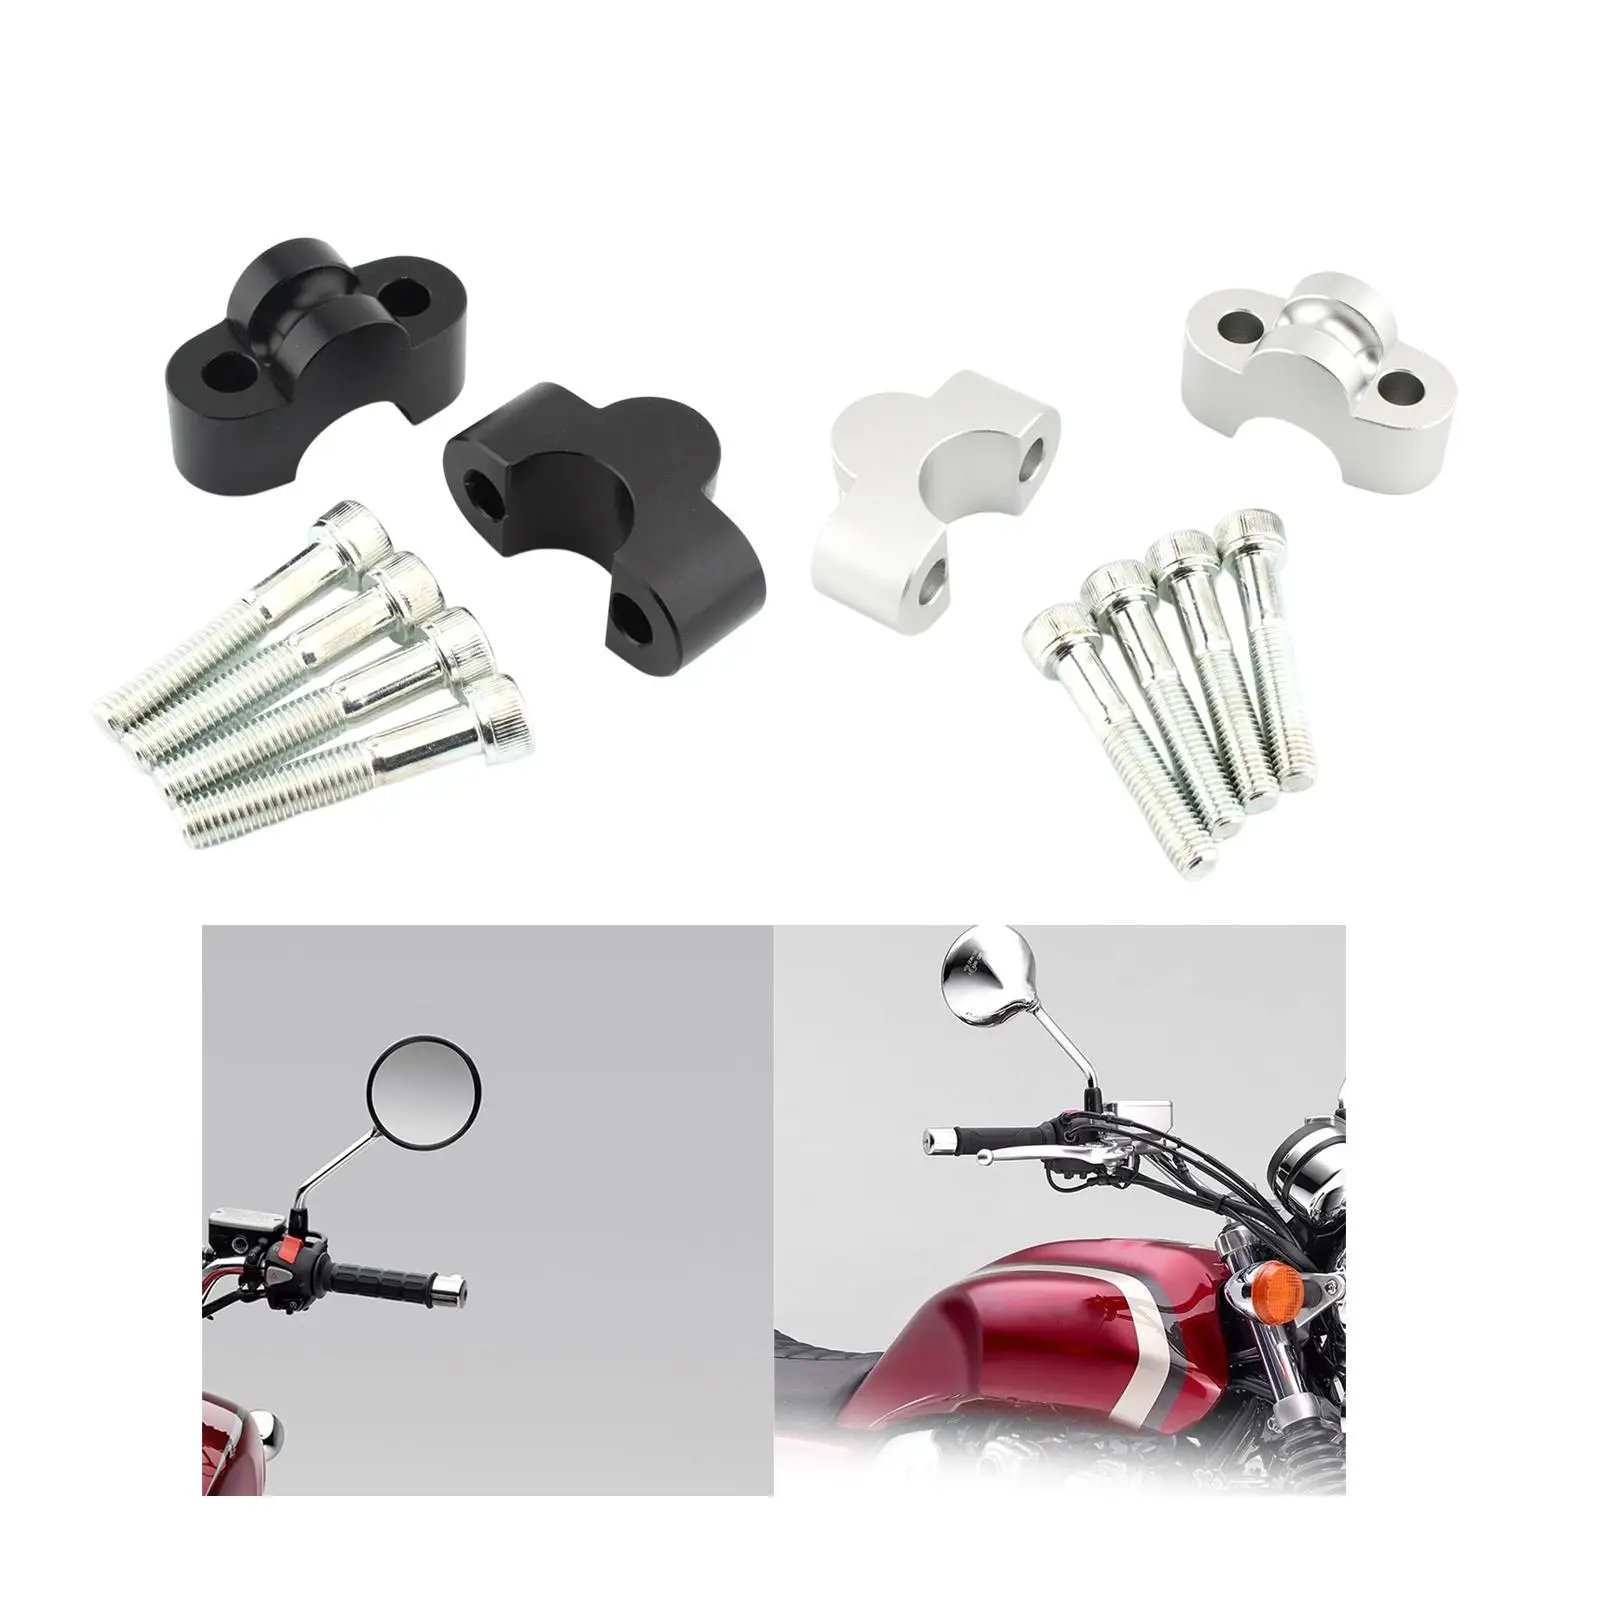 2 Pieces Handlebar Risers Motorcycle Accessories 3/4 inch Clamp Handle Bar Riser for Honda CB1100 RS CB1100 EX Msx125 Grom